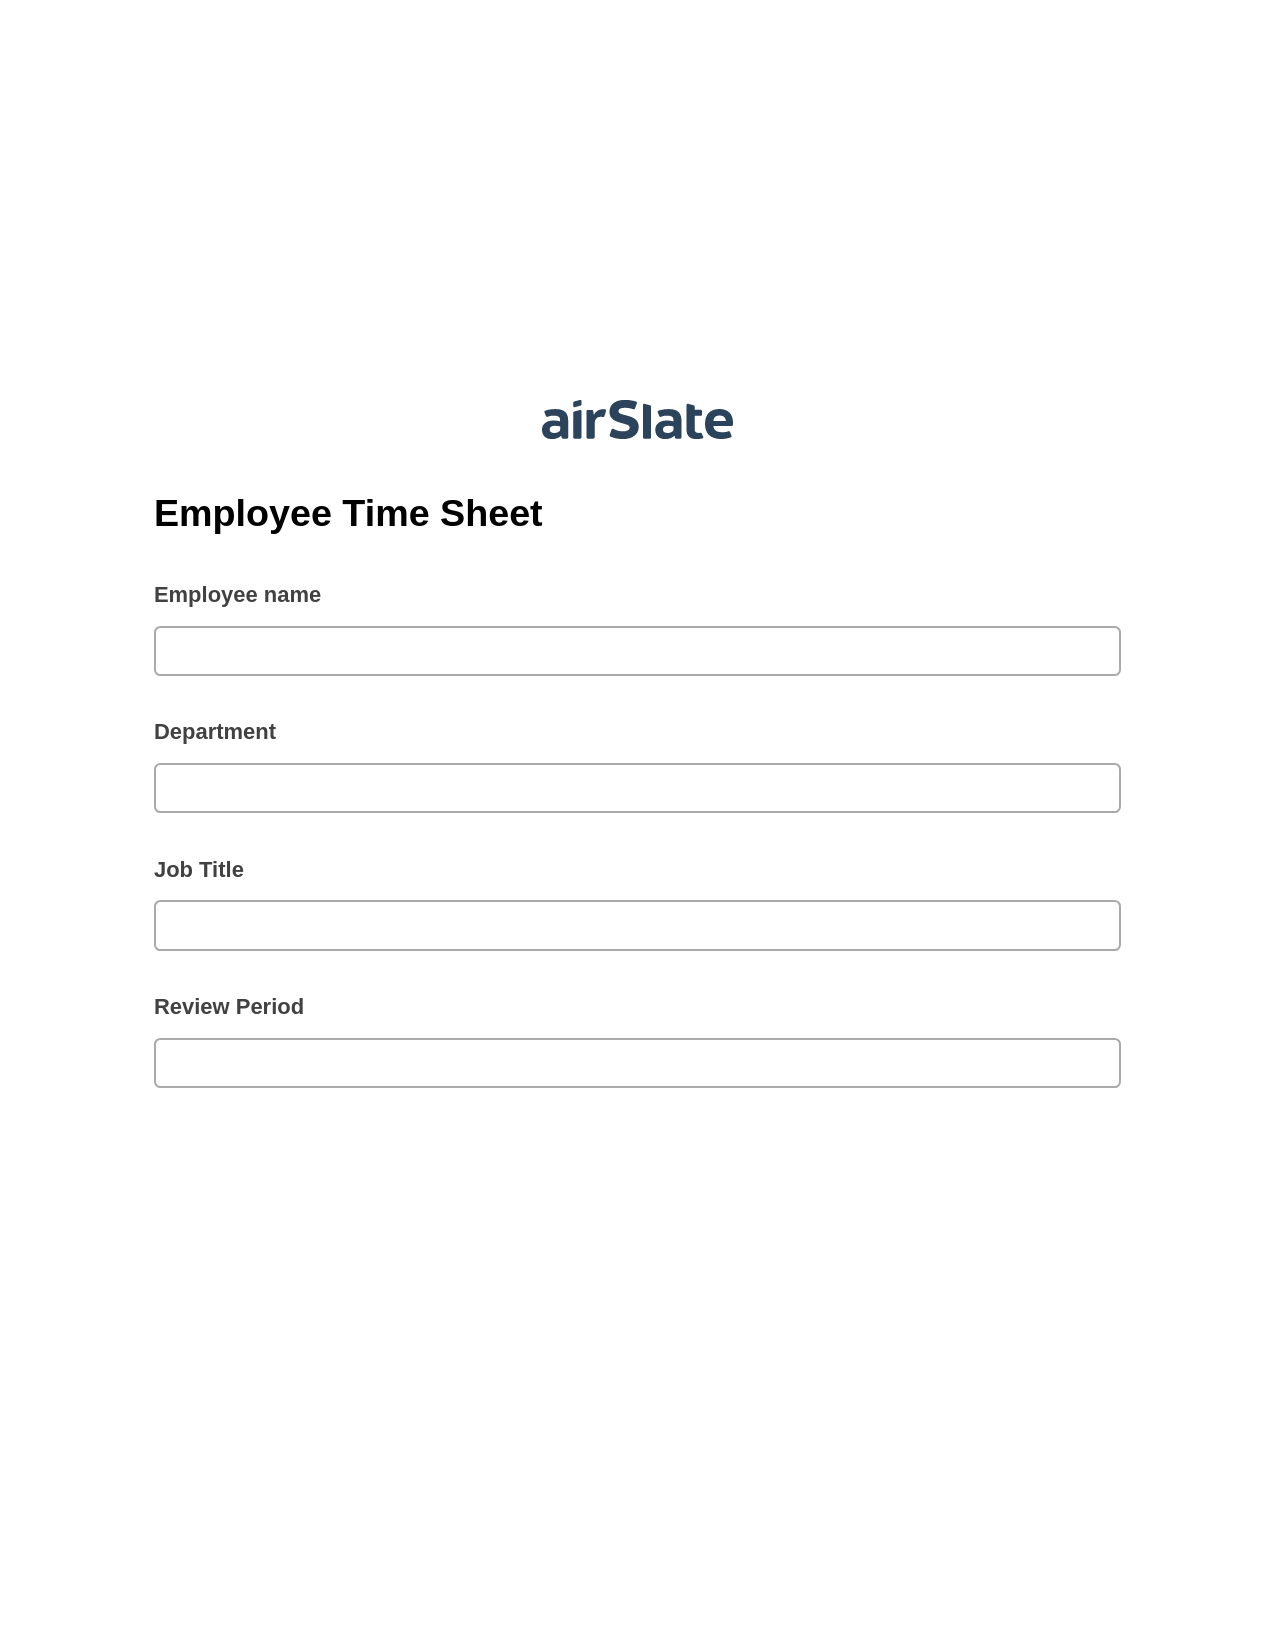 Employee Time Sheet Pre-fill Document Bot, Create Salesforce Records Bot, Archive to Box Bot